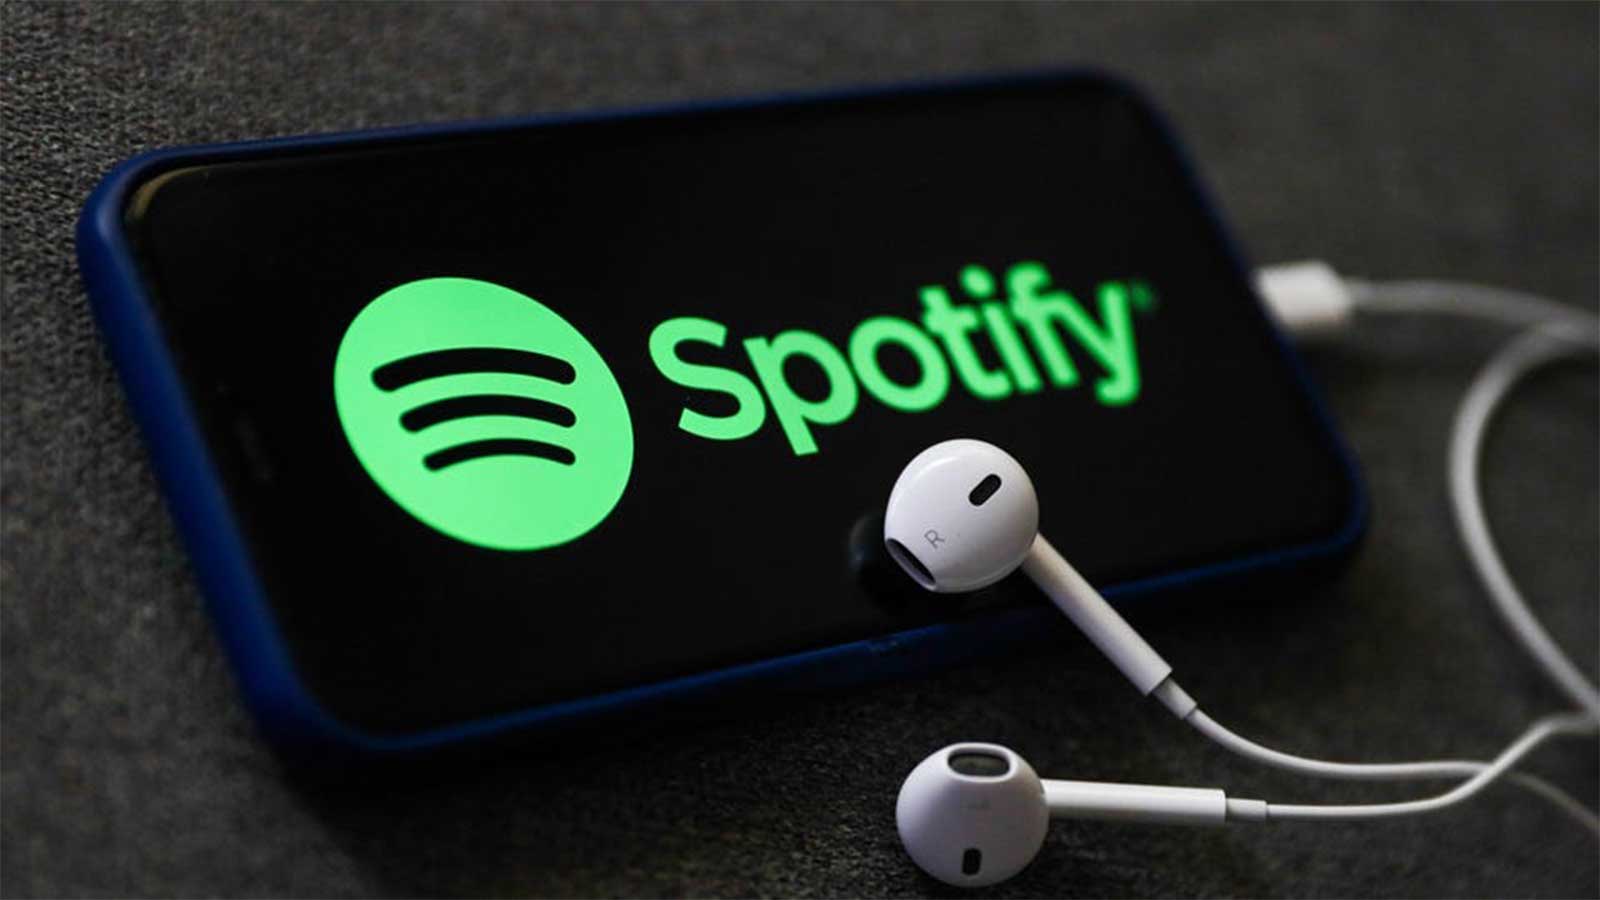 Spotify: How To Use A Scan Code To Scan Songs